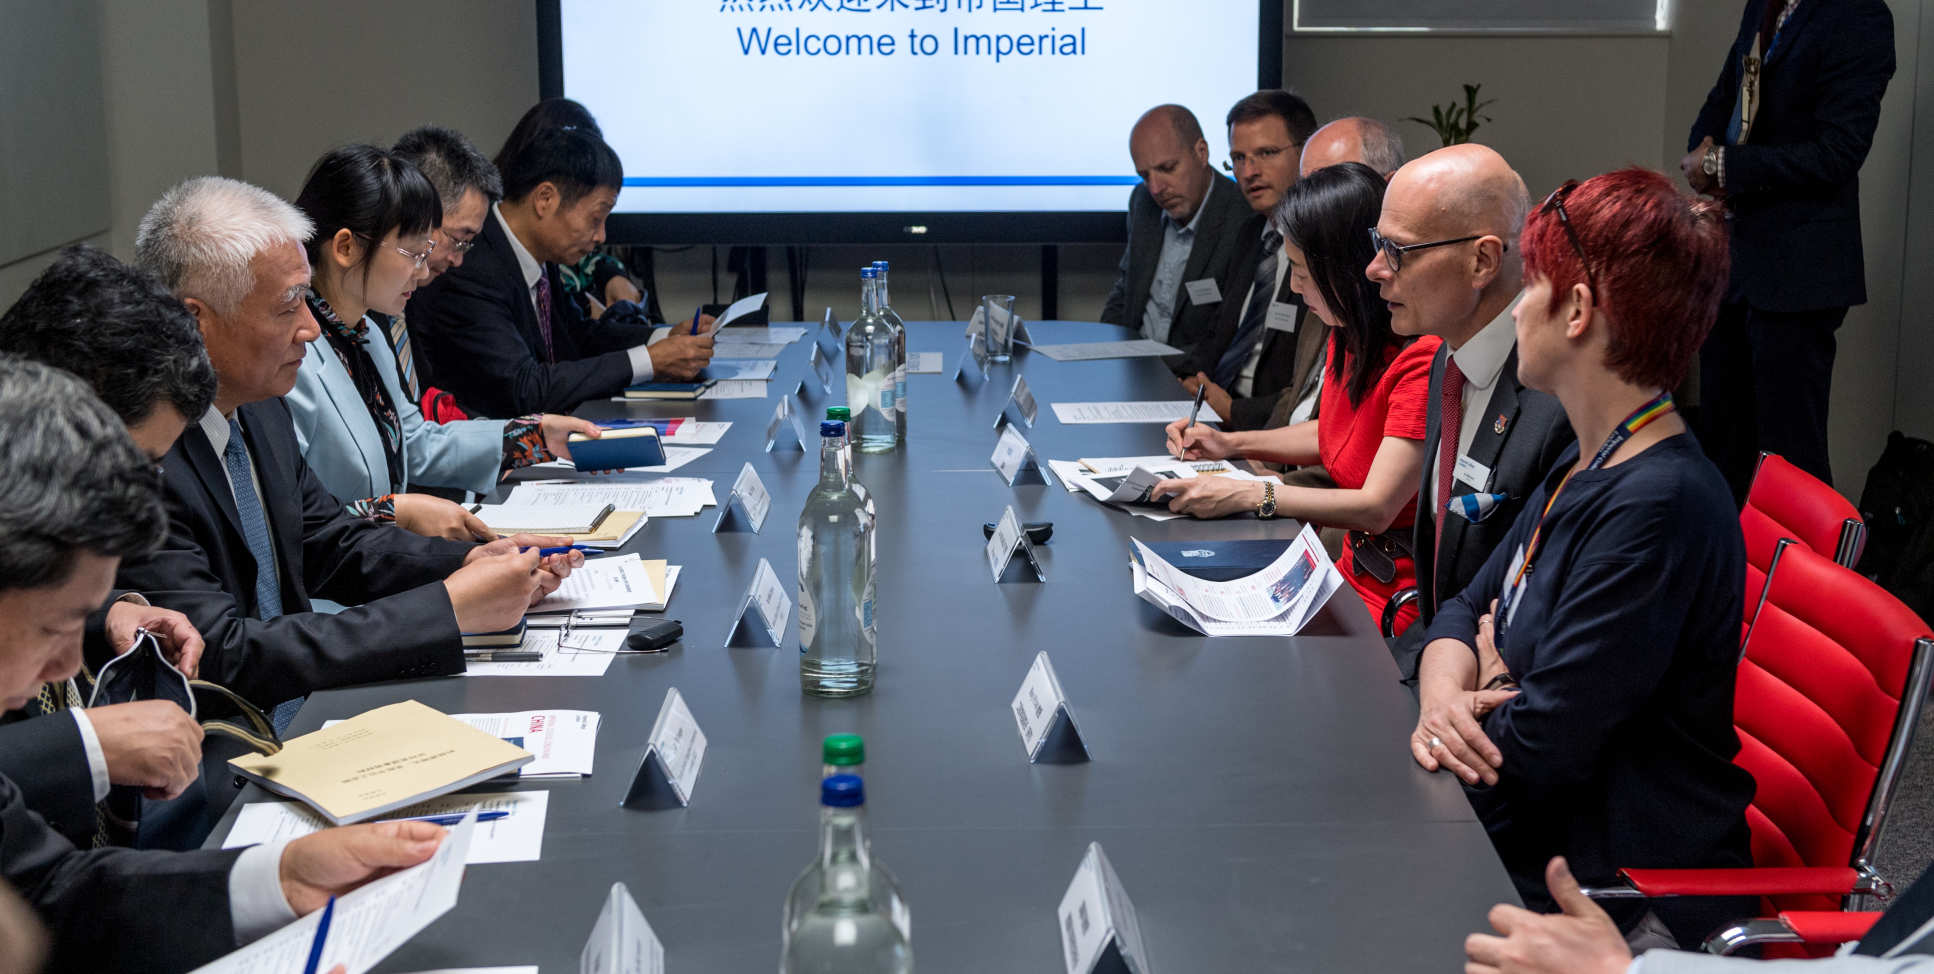 Minister Wang with Imperial academics